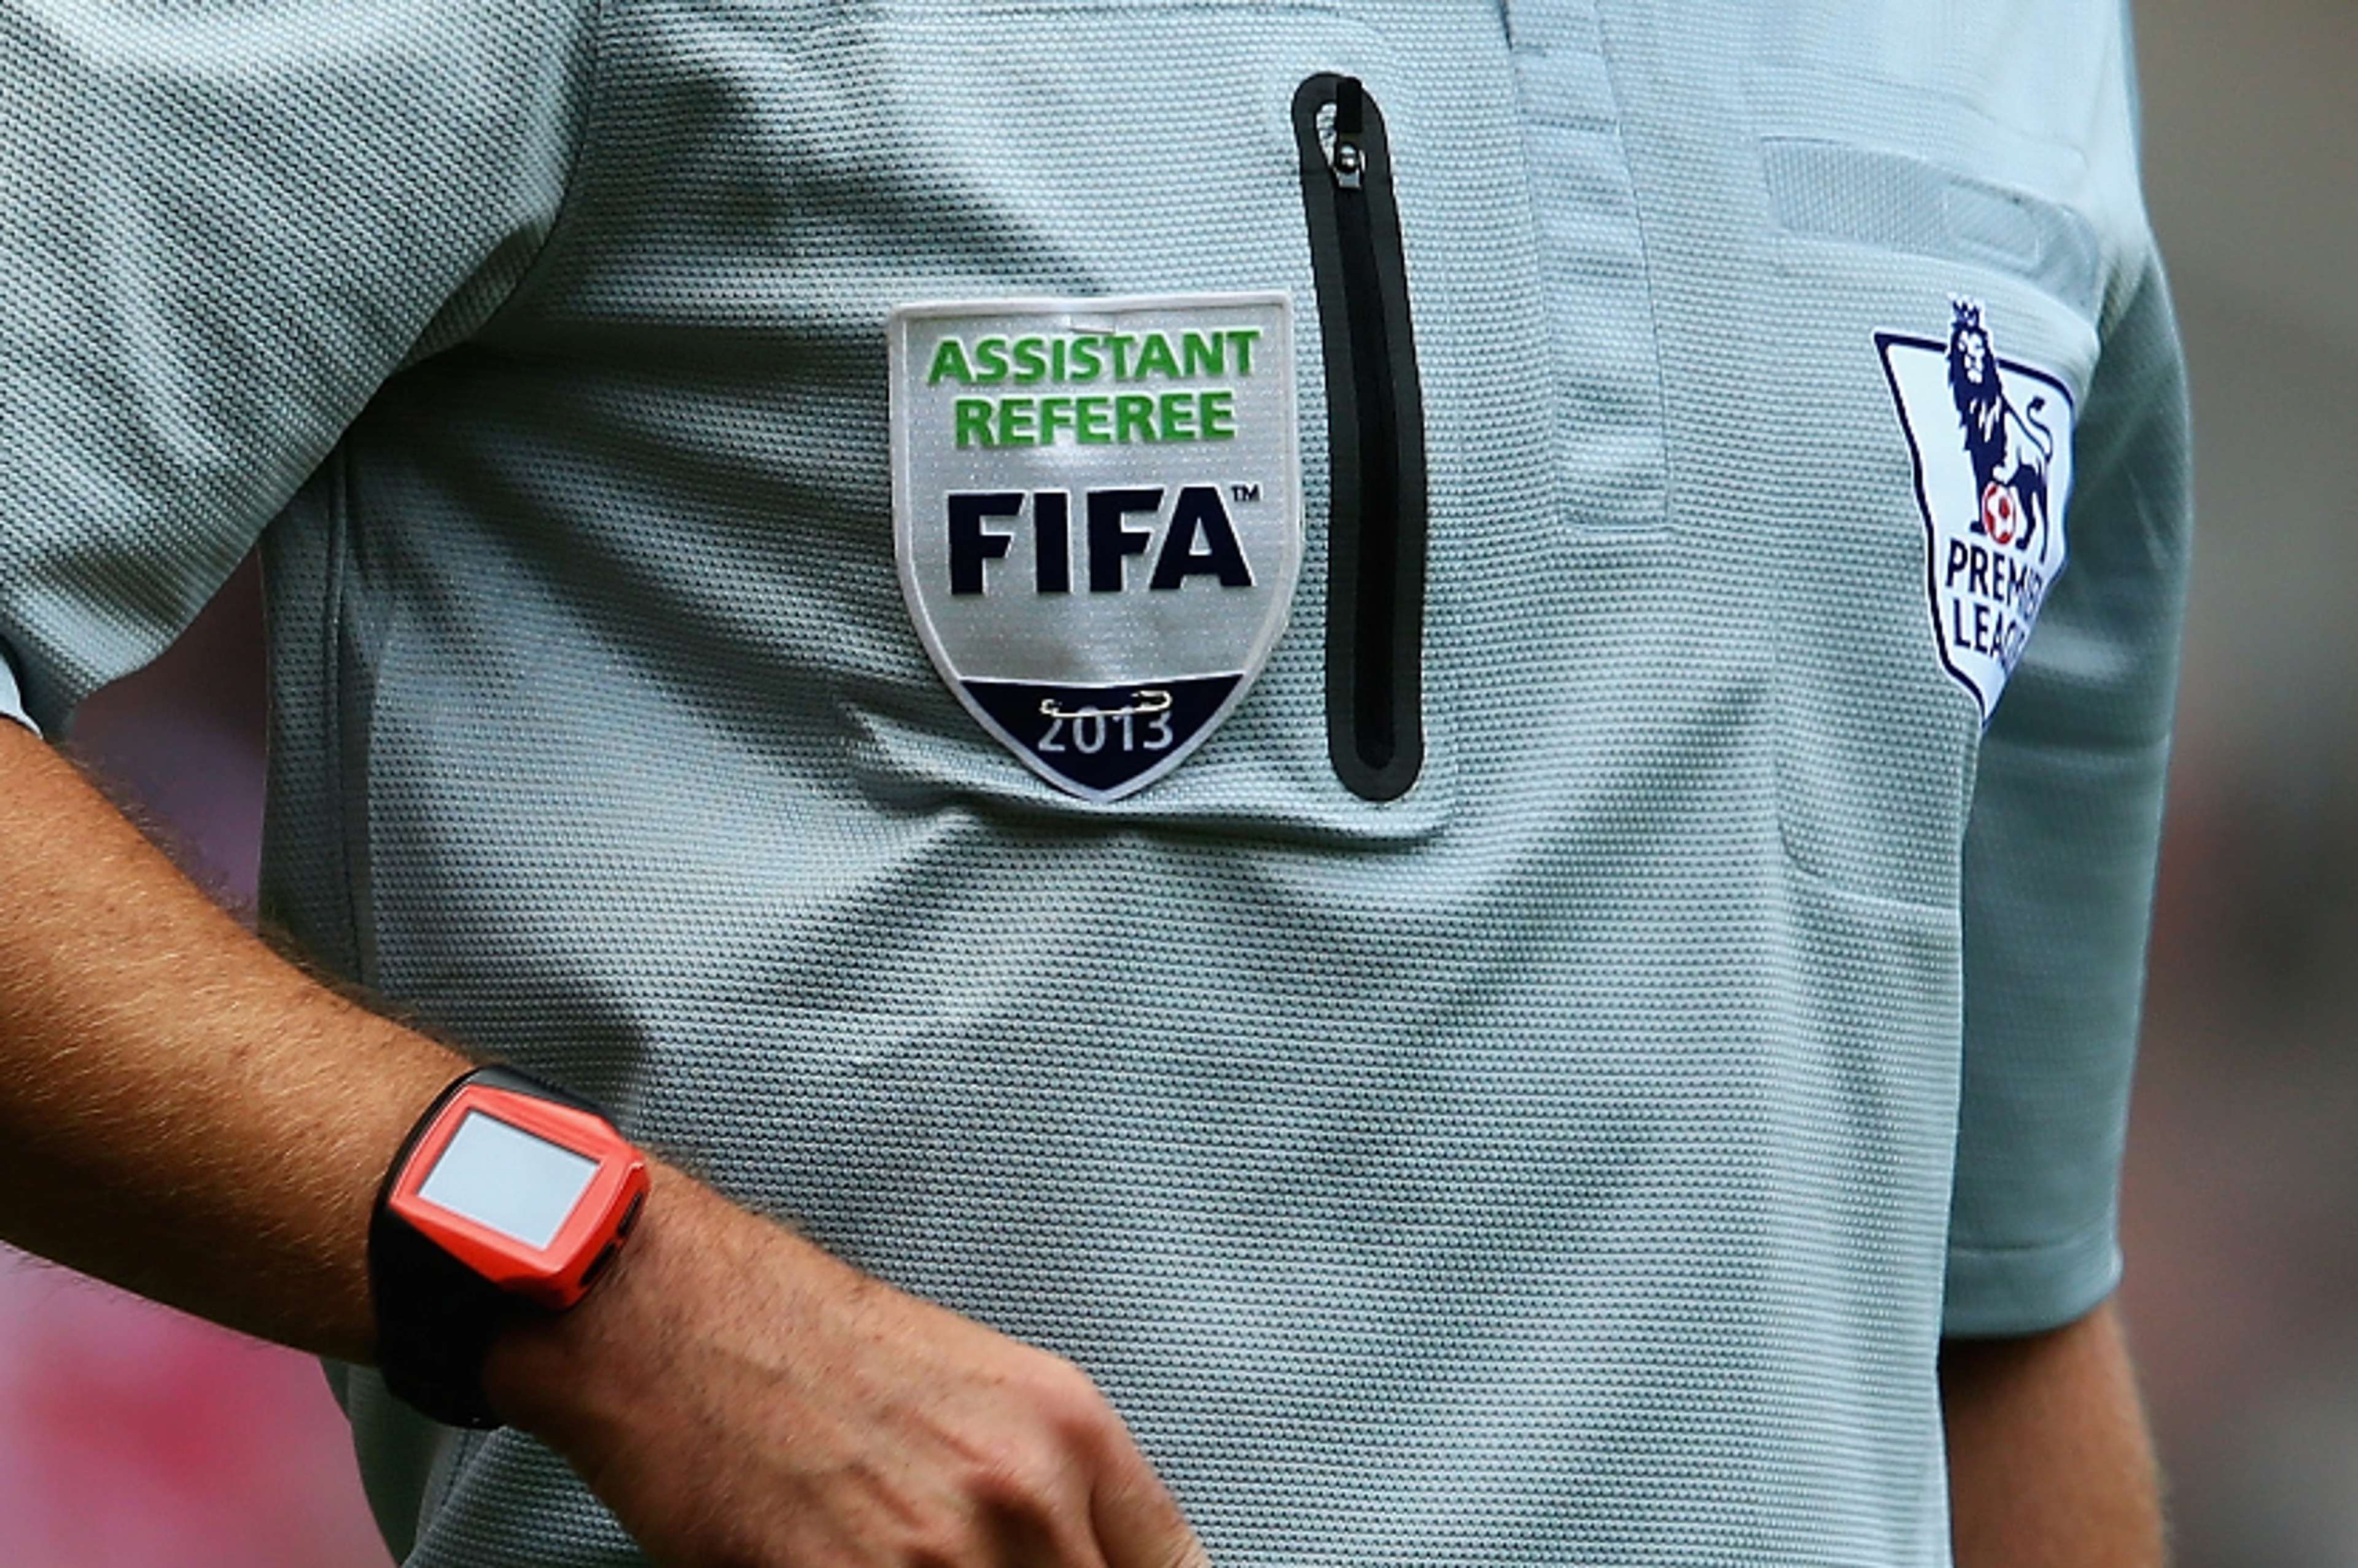 FIFA , Referees - Assistant Referee - wristwatch